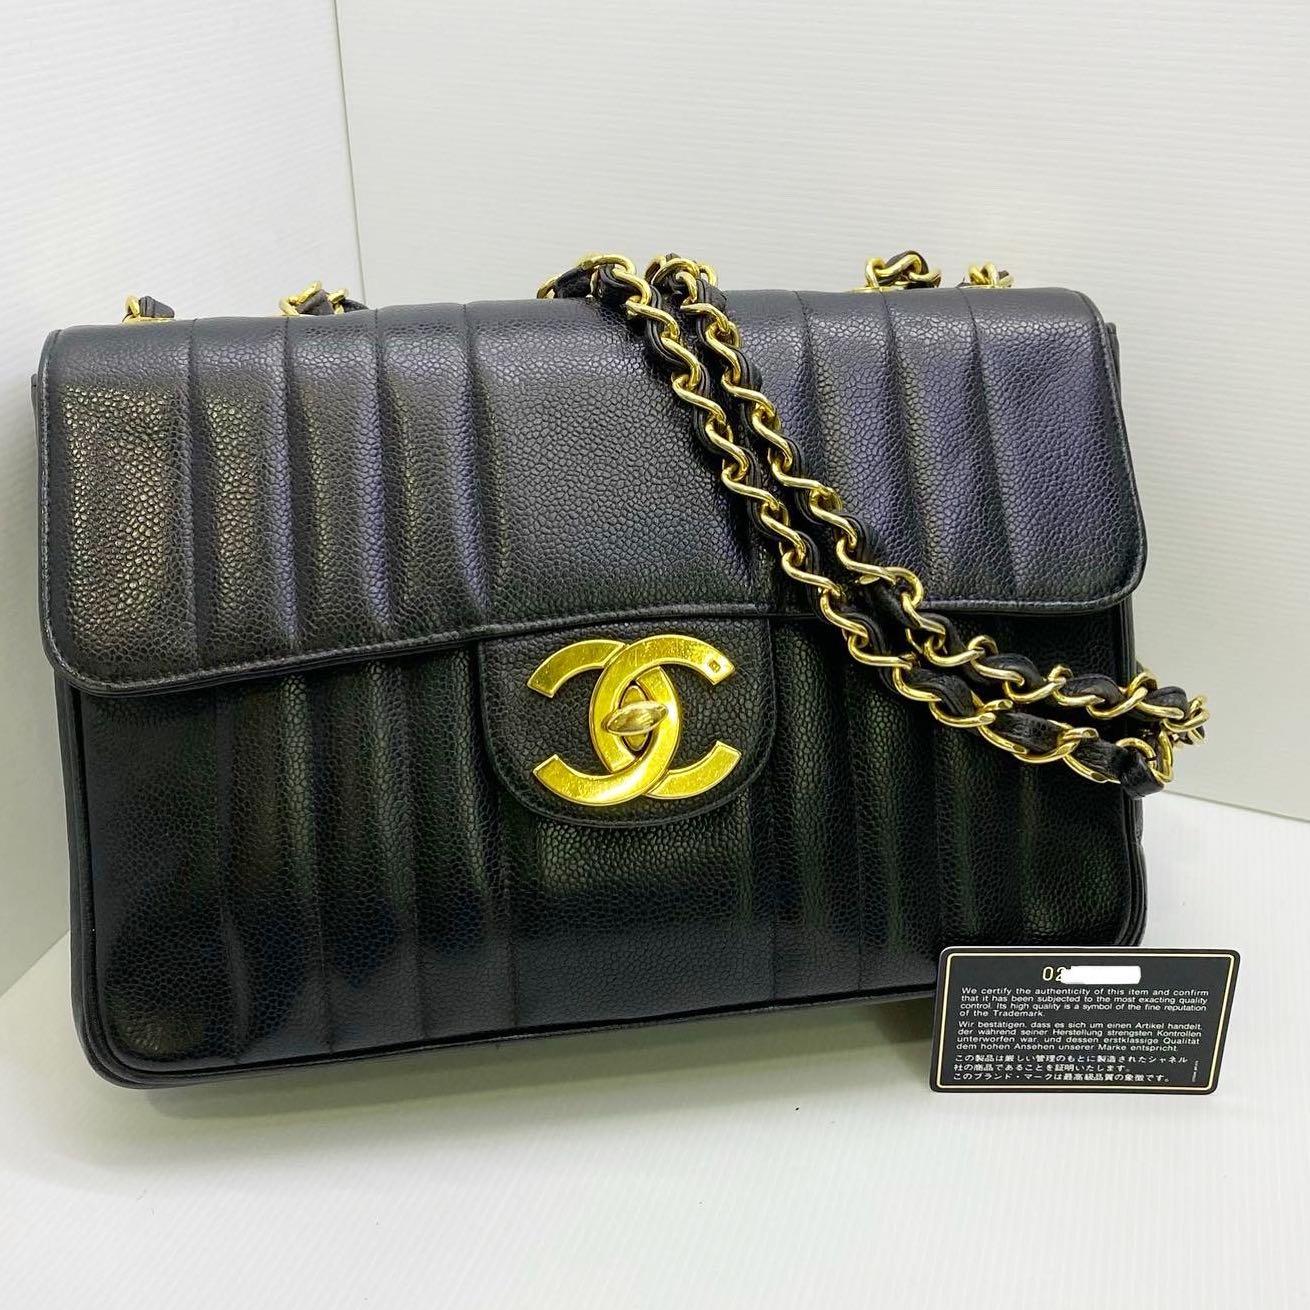 Chanel Mademoiselle 30 Single Flap Bag No0 Luxury Bags Wallets Sling Bags On Carousell